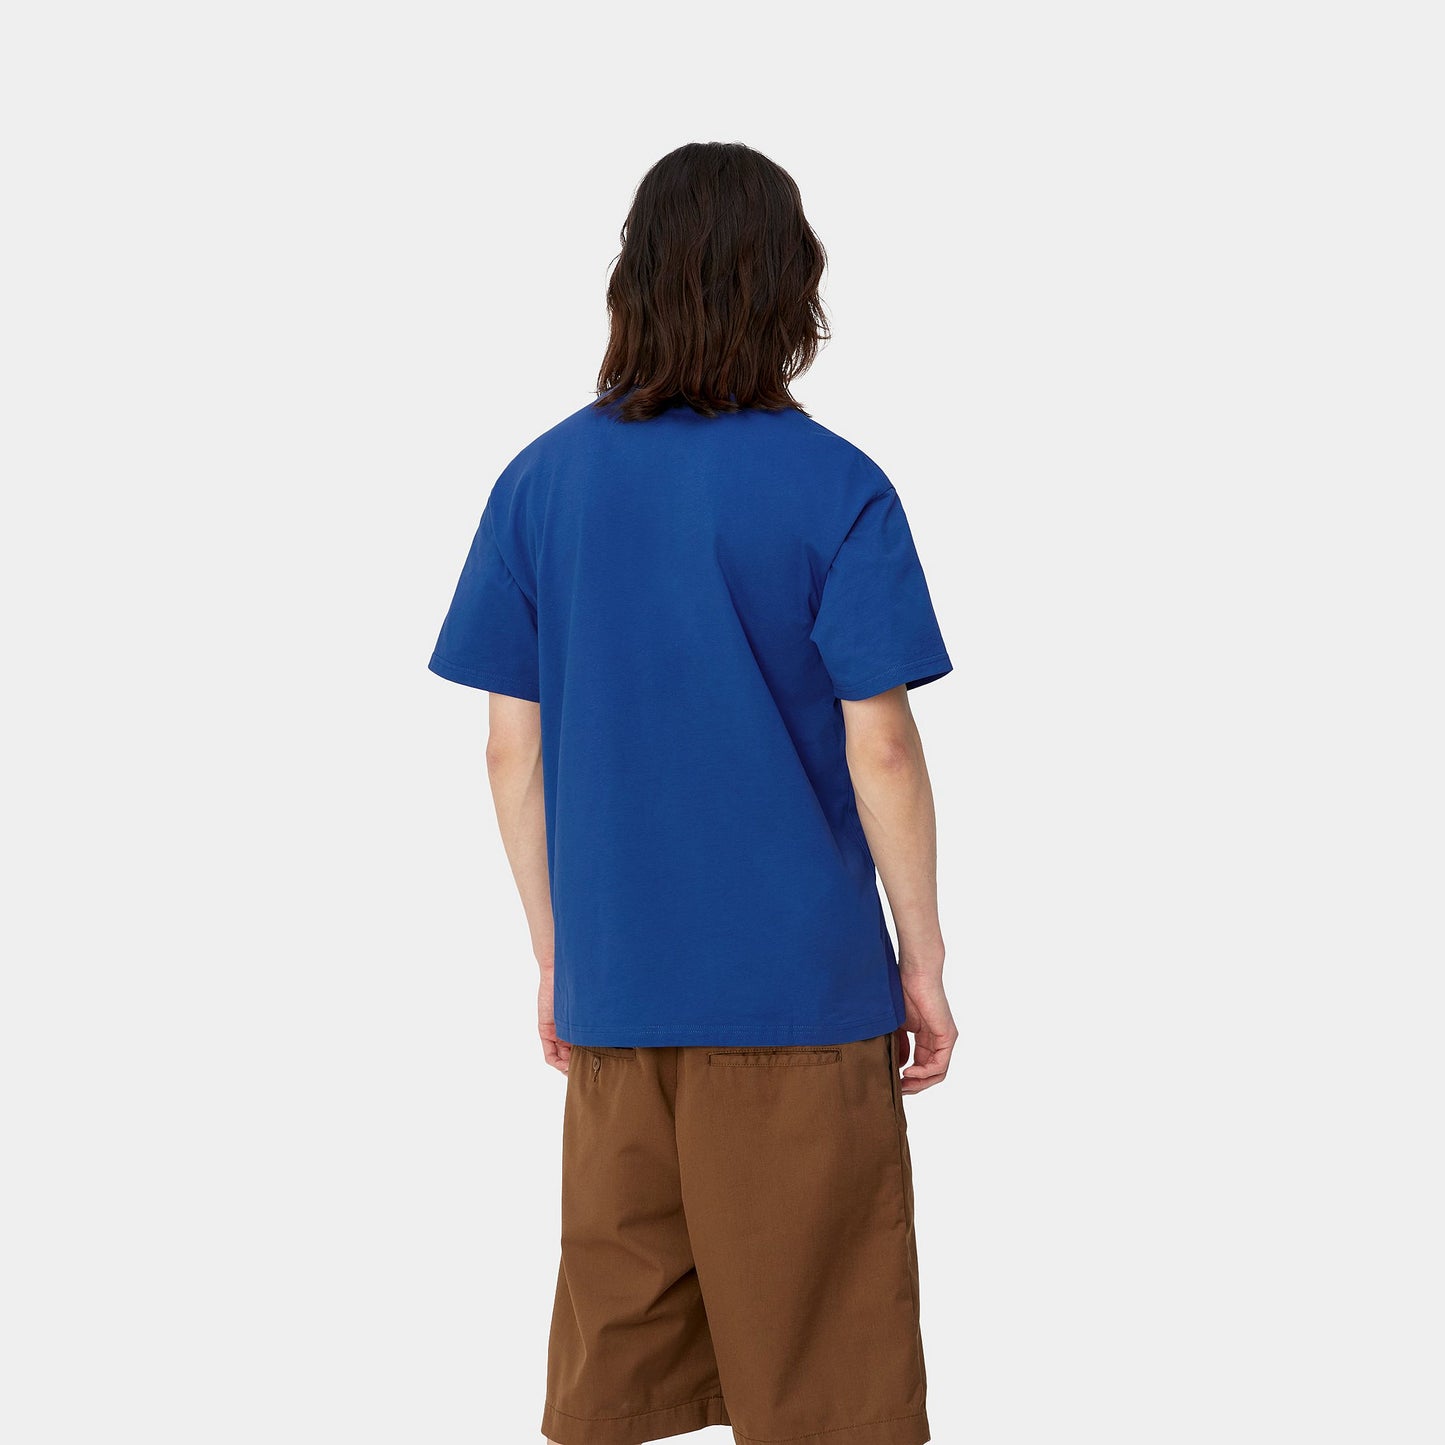 Carhartt S/S Chase T-Shirt